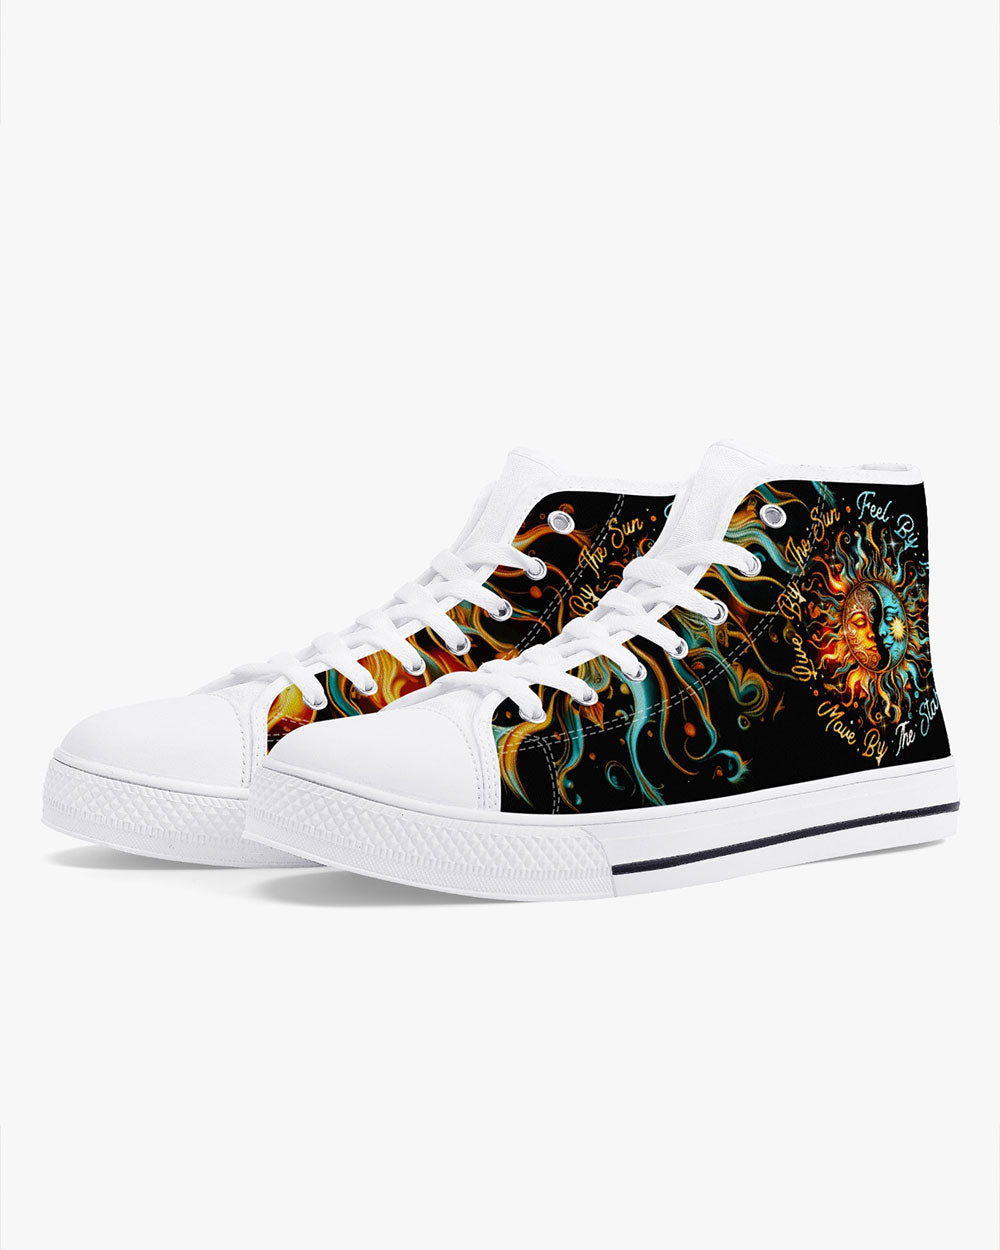 LIVE BY THE SUN HIGH TOP CANVAS SHOES - TY0403235